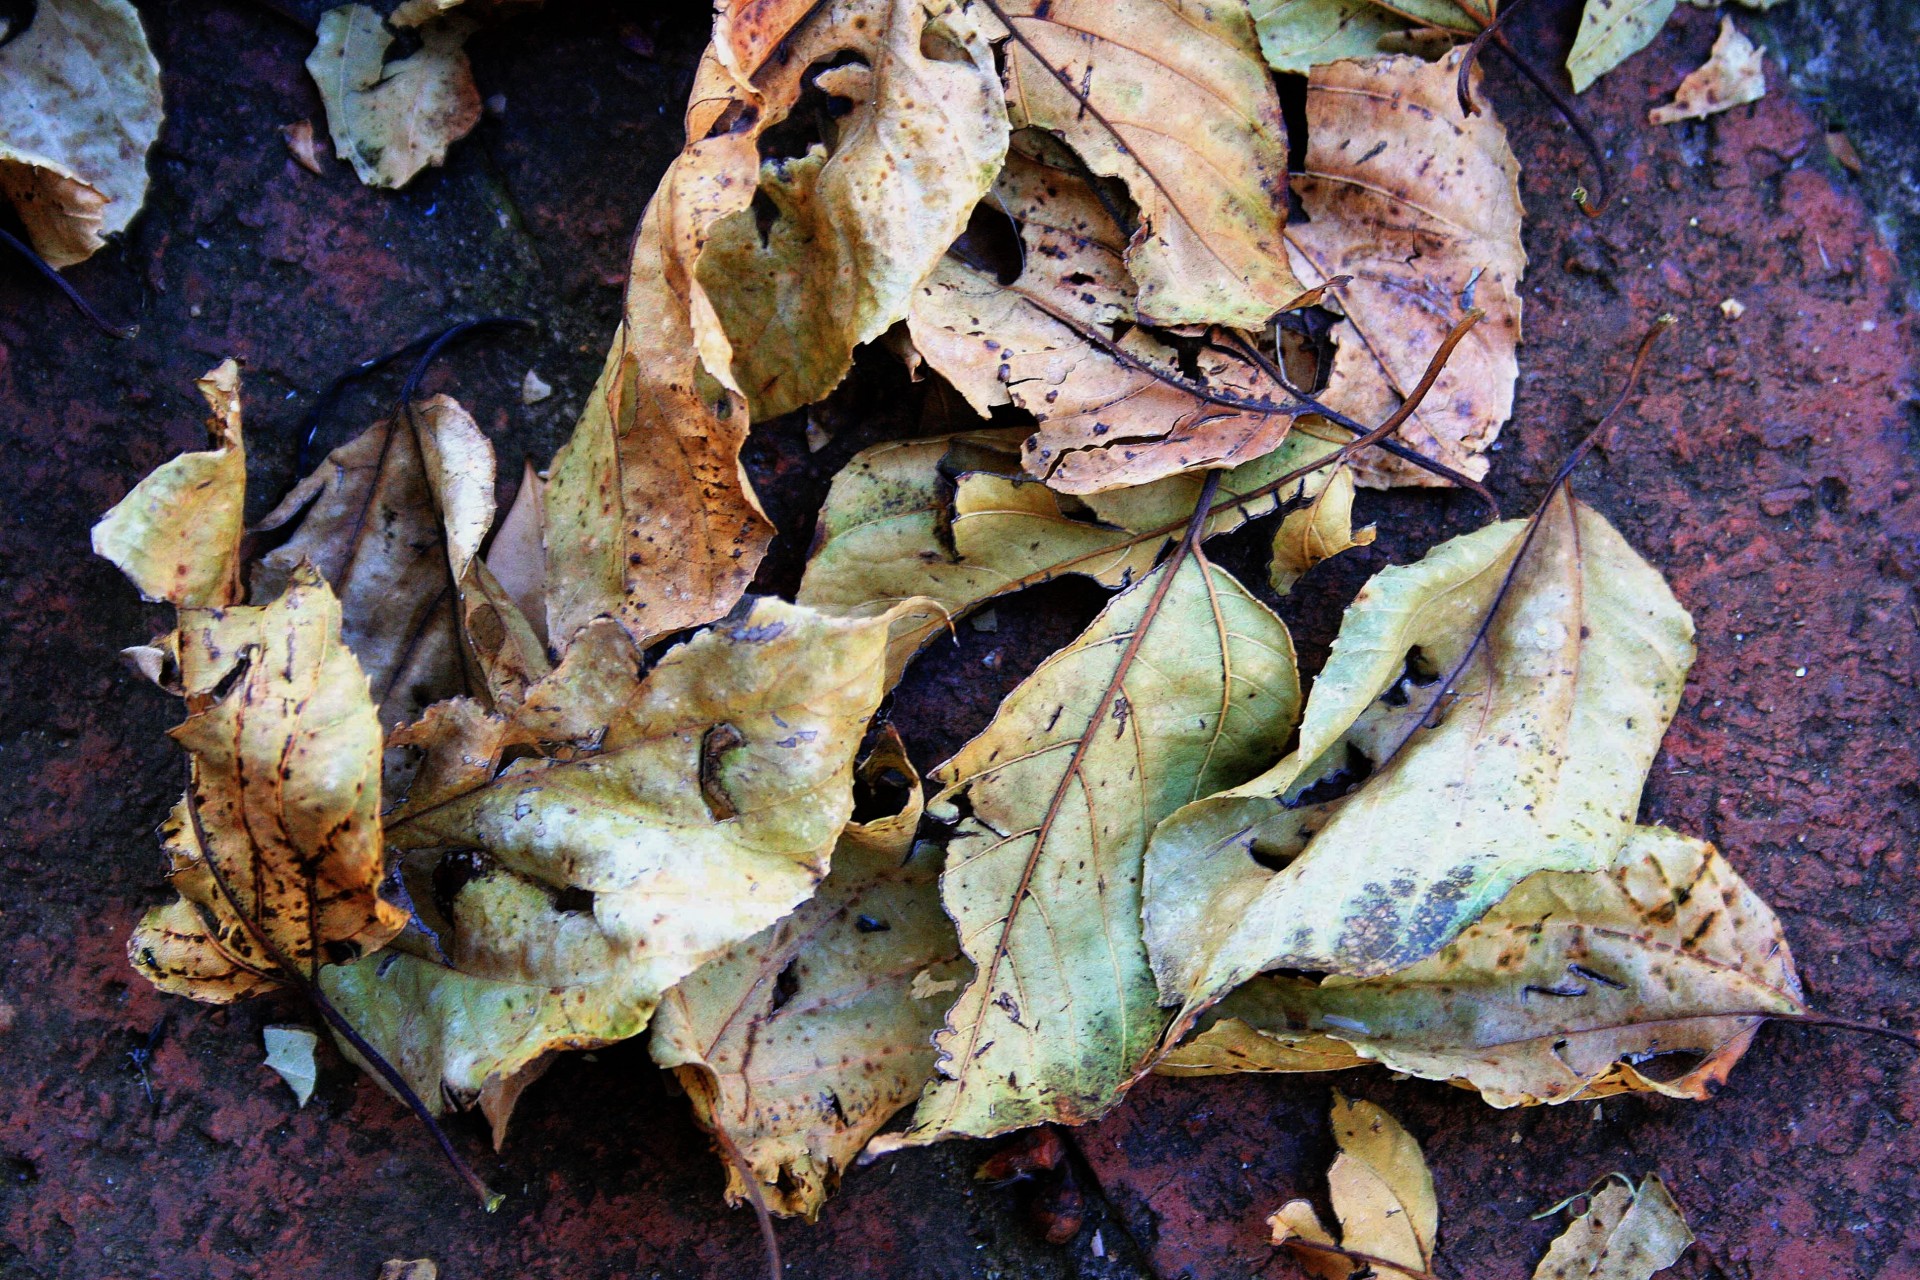 Leaves,dead,brown,brittle,faded - free image from needpix.com